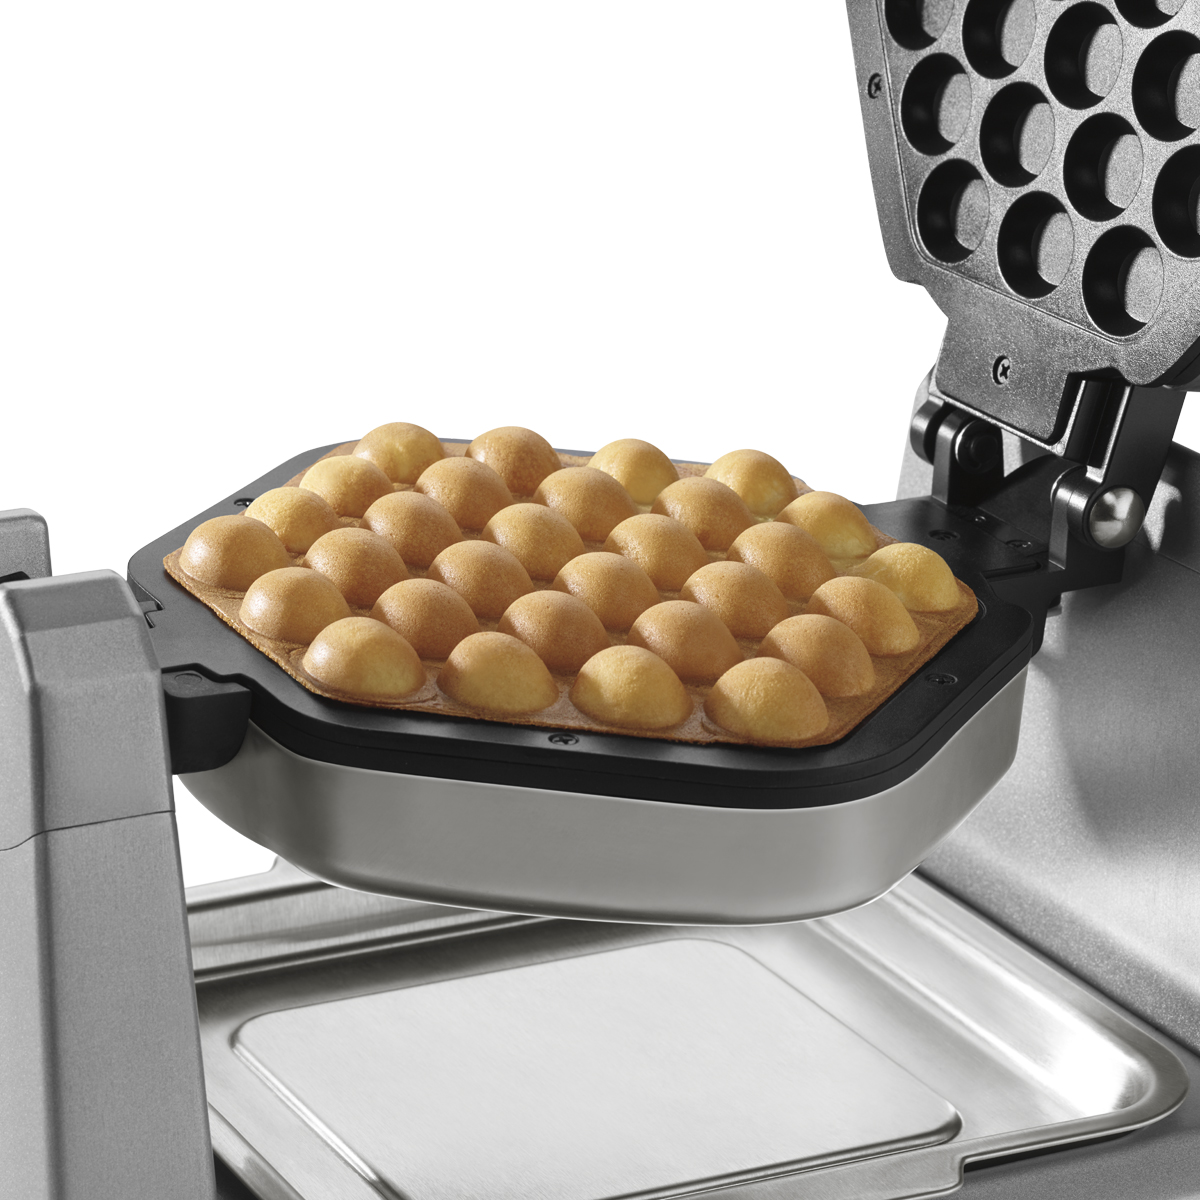 https://www.waringcommercialproducts.com/files/products/wbw300x-waring-bubble-waffle-maker-inset-5.jpg